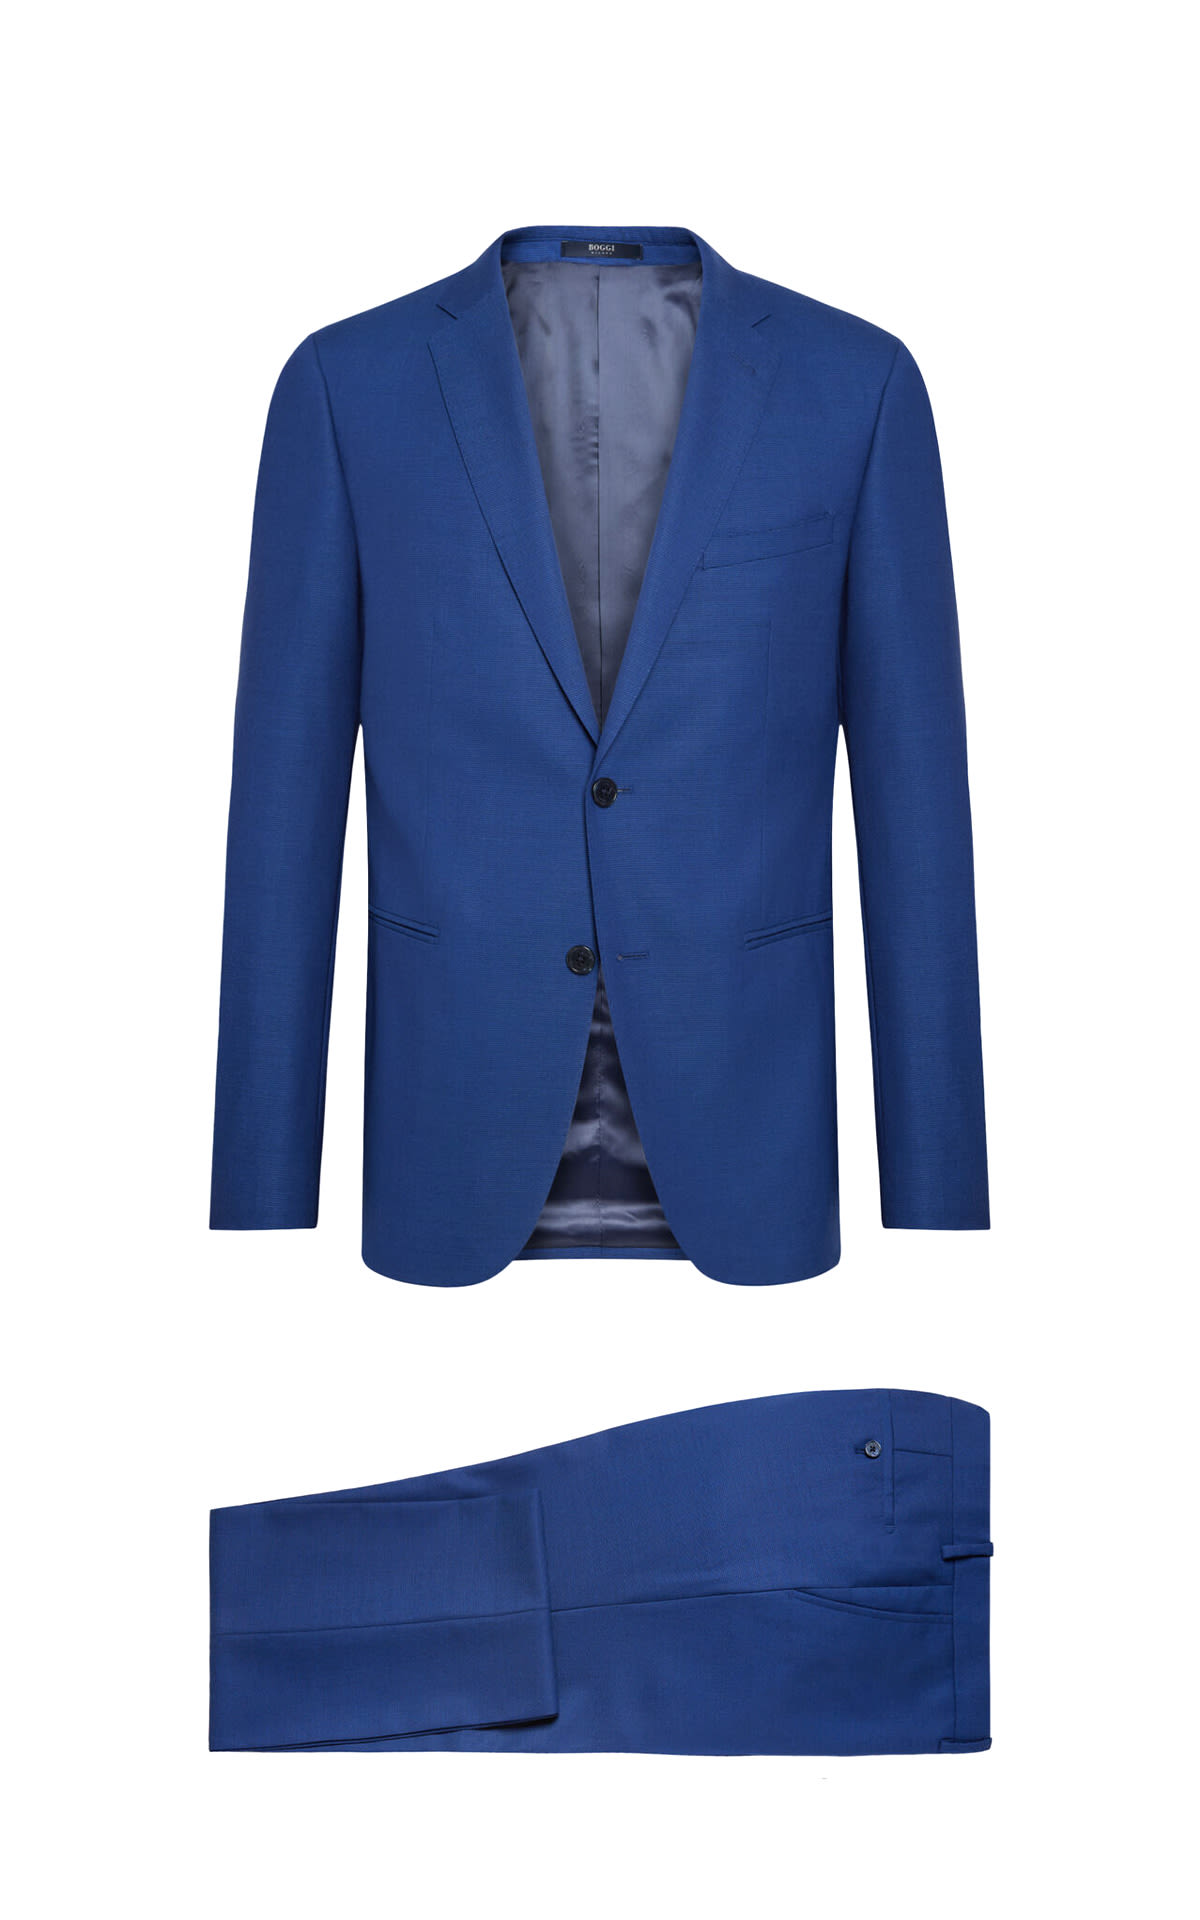 Suit: Jacket and trousers